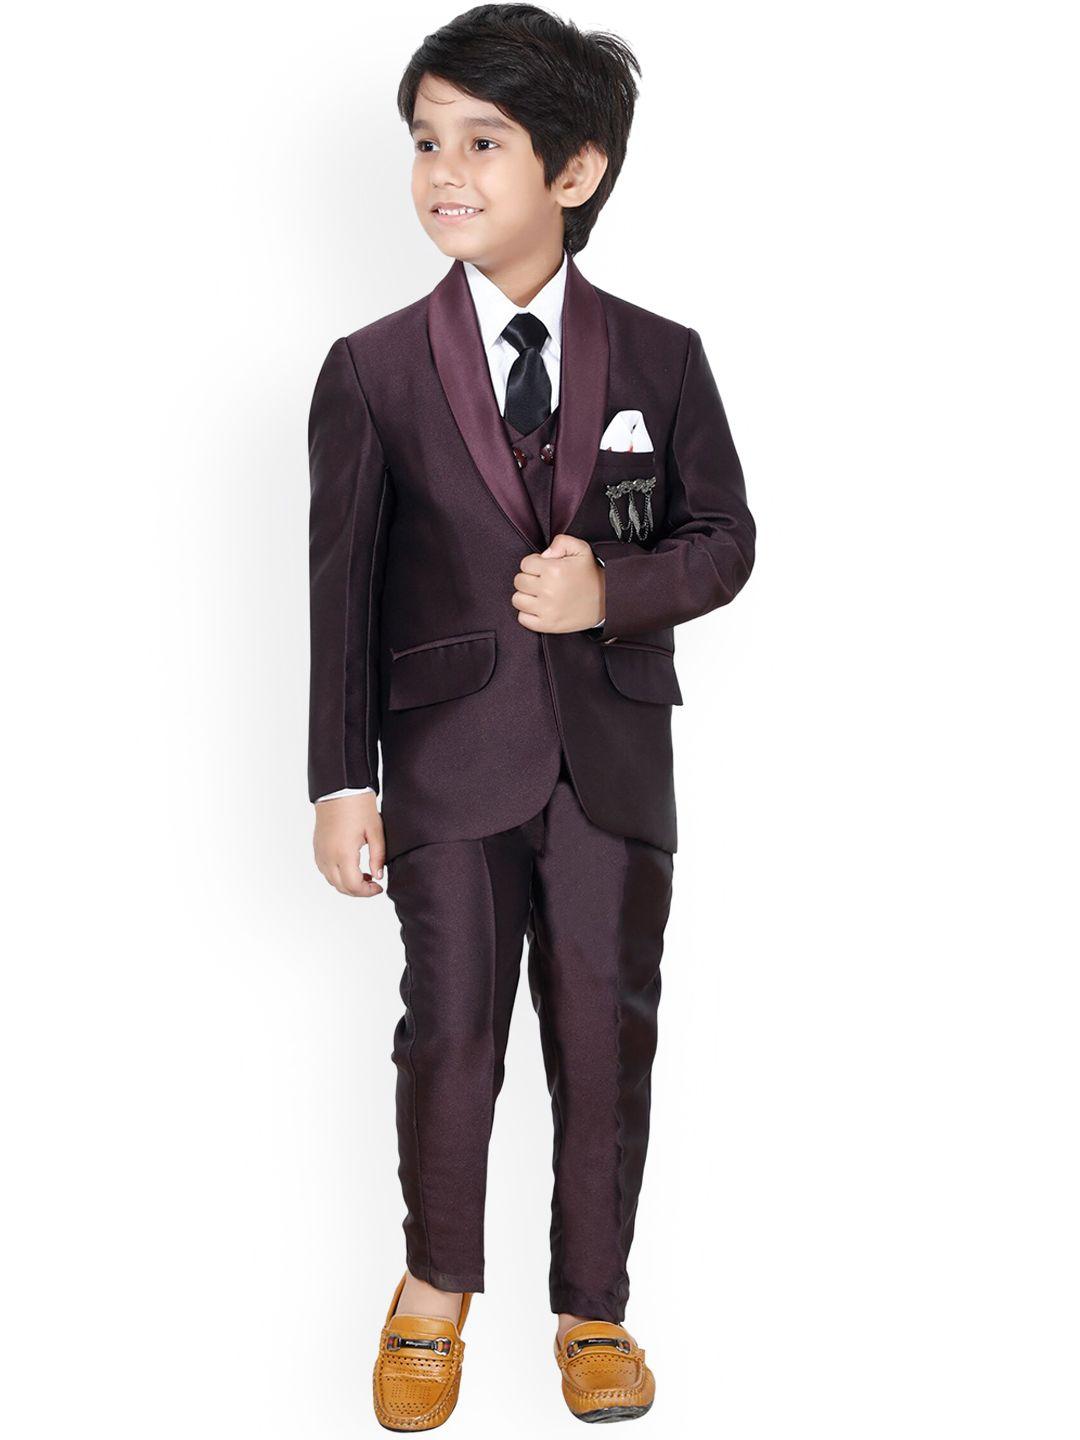 dkgf fashion boys red solid 4 piece suits